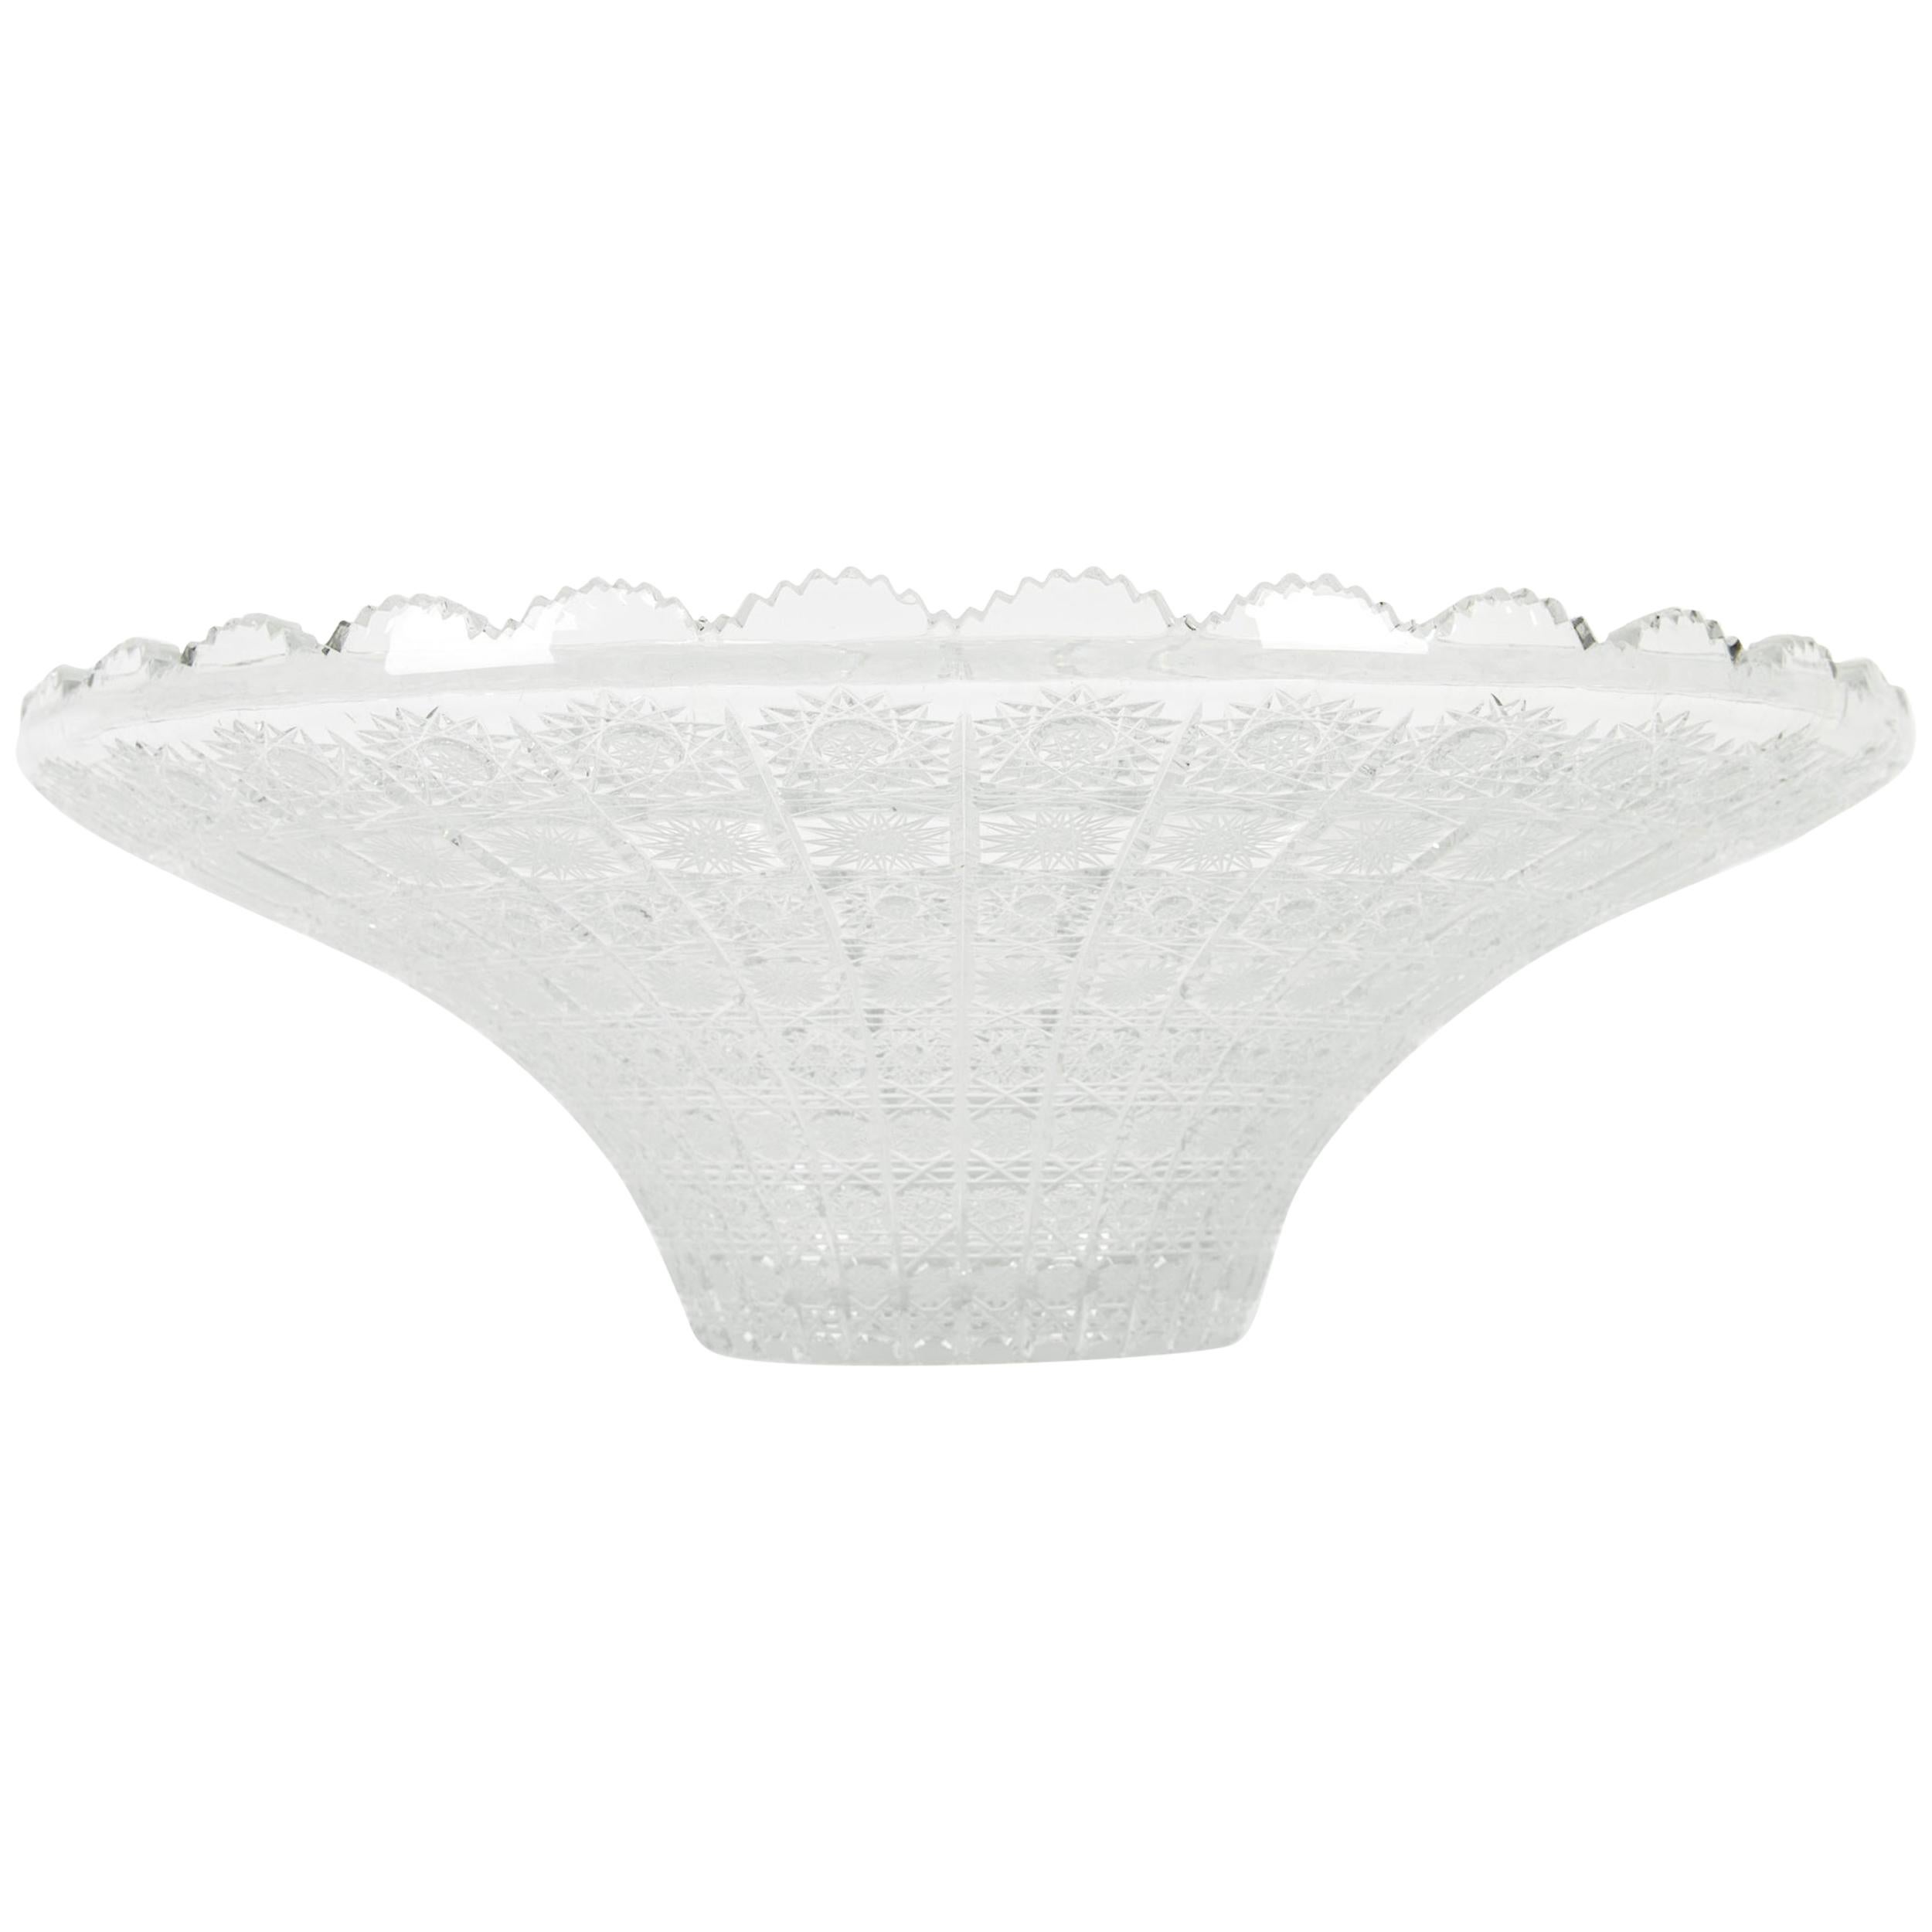 Mid-20th Century Exquisite Cut Crystal Center Piece Bowl